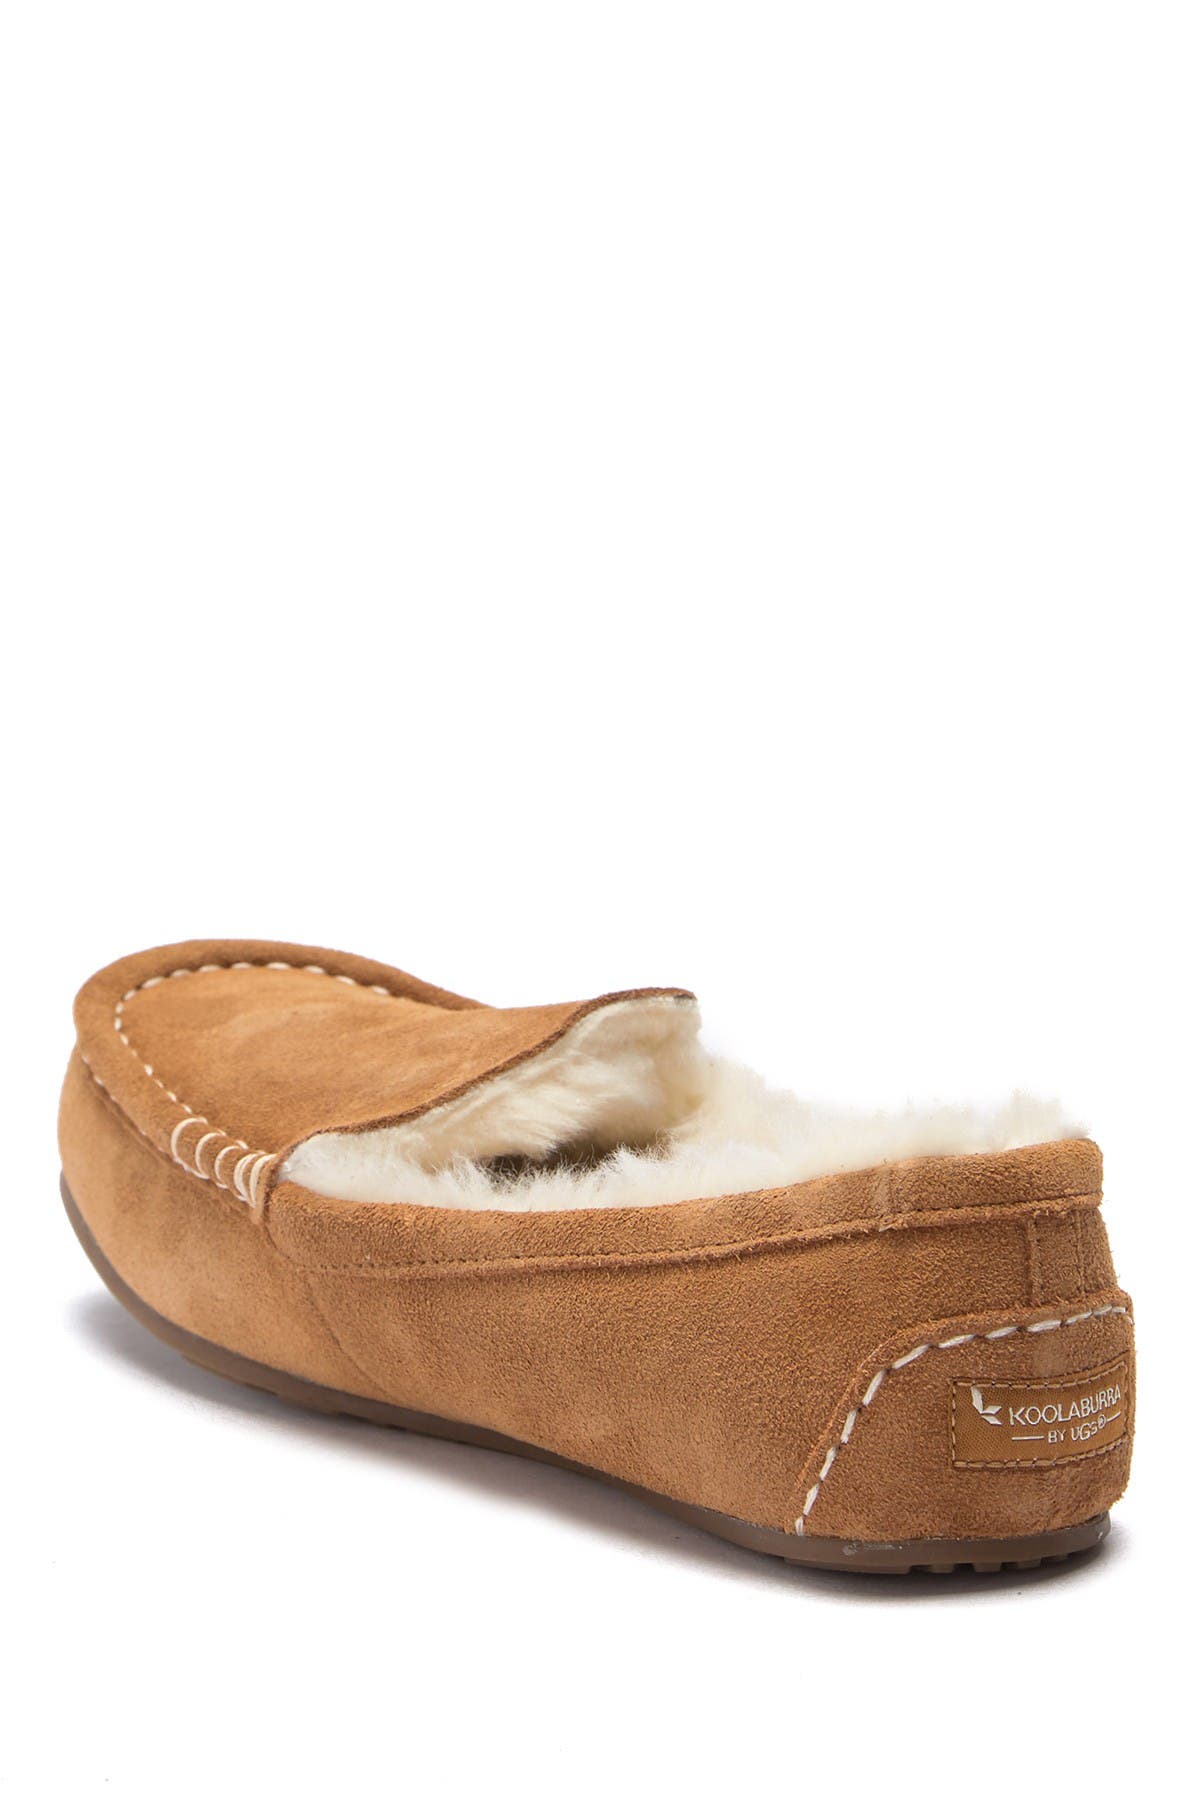 Koolaburra By Ugg Lezly Faux Fur Lined Moccasin In Medium Brown9